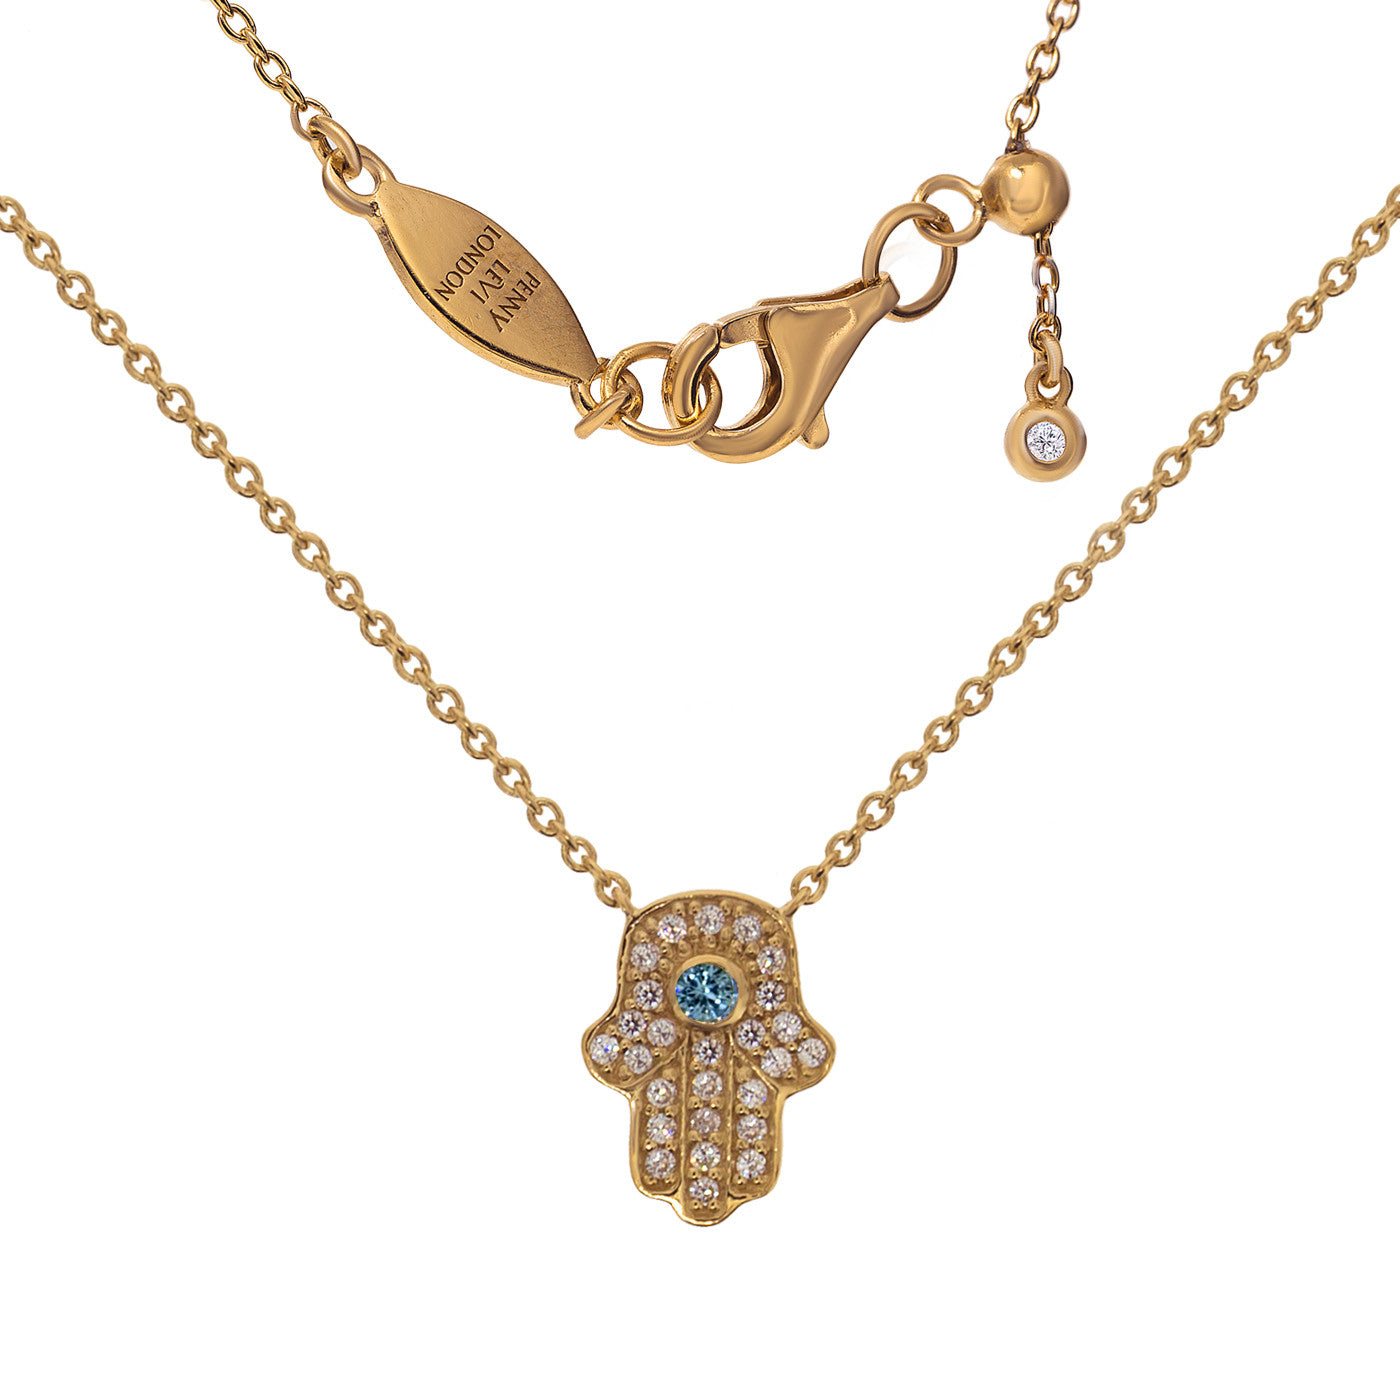 NT-201/R - Hamsa (hand) and Chain Necklace. Adjustable Length